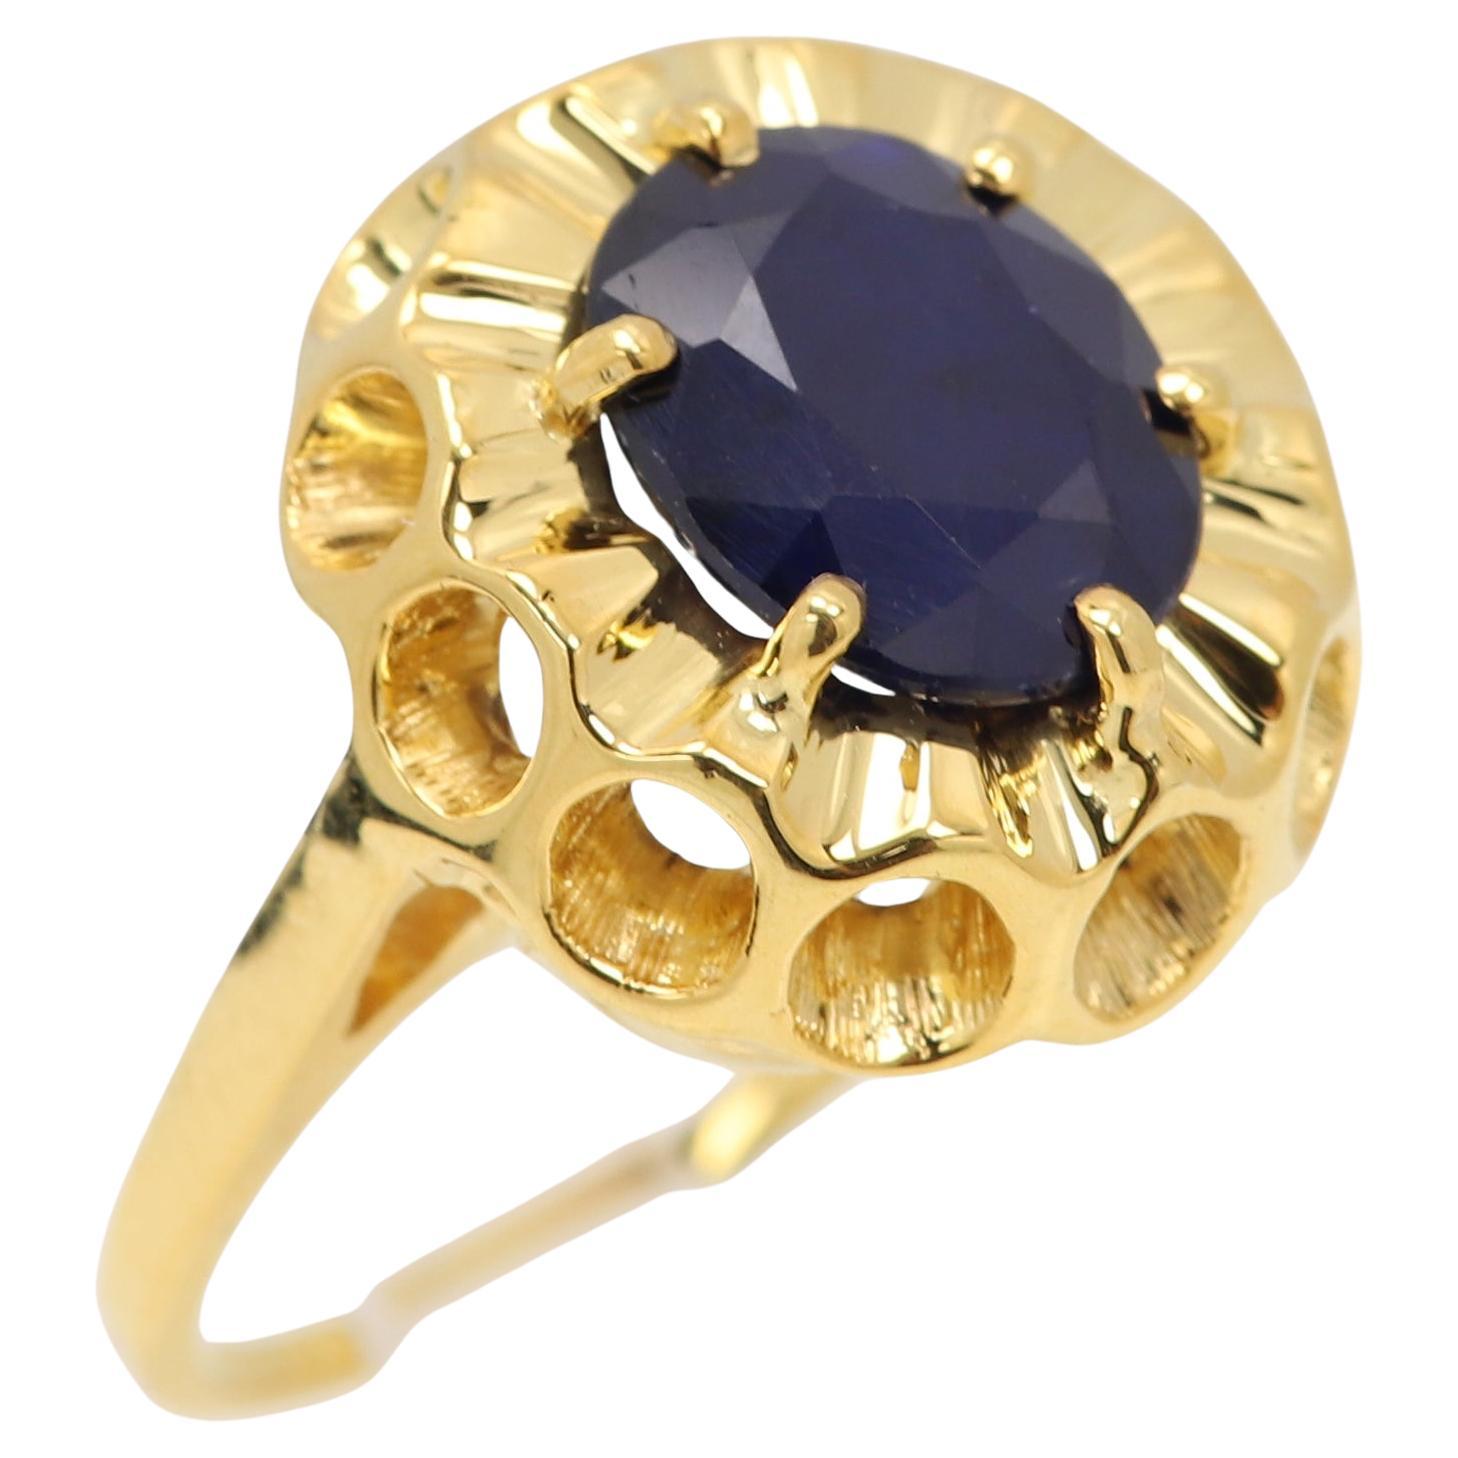 Vintage Large Oval Sapphire Ring 14 Karat Yellow Gold Circa 1940's For Sale